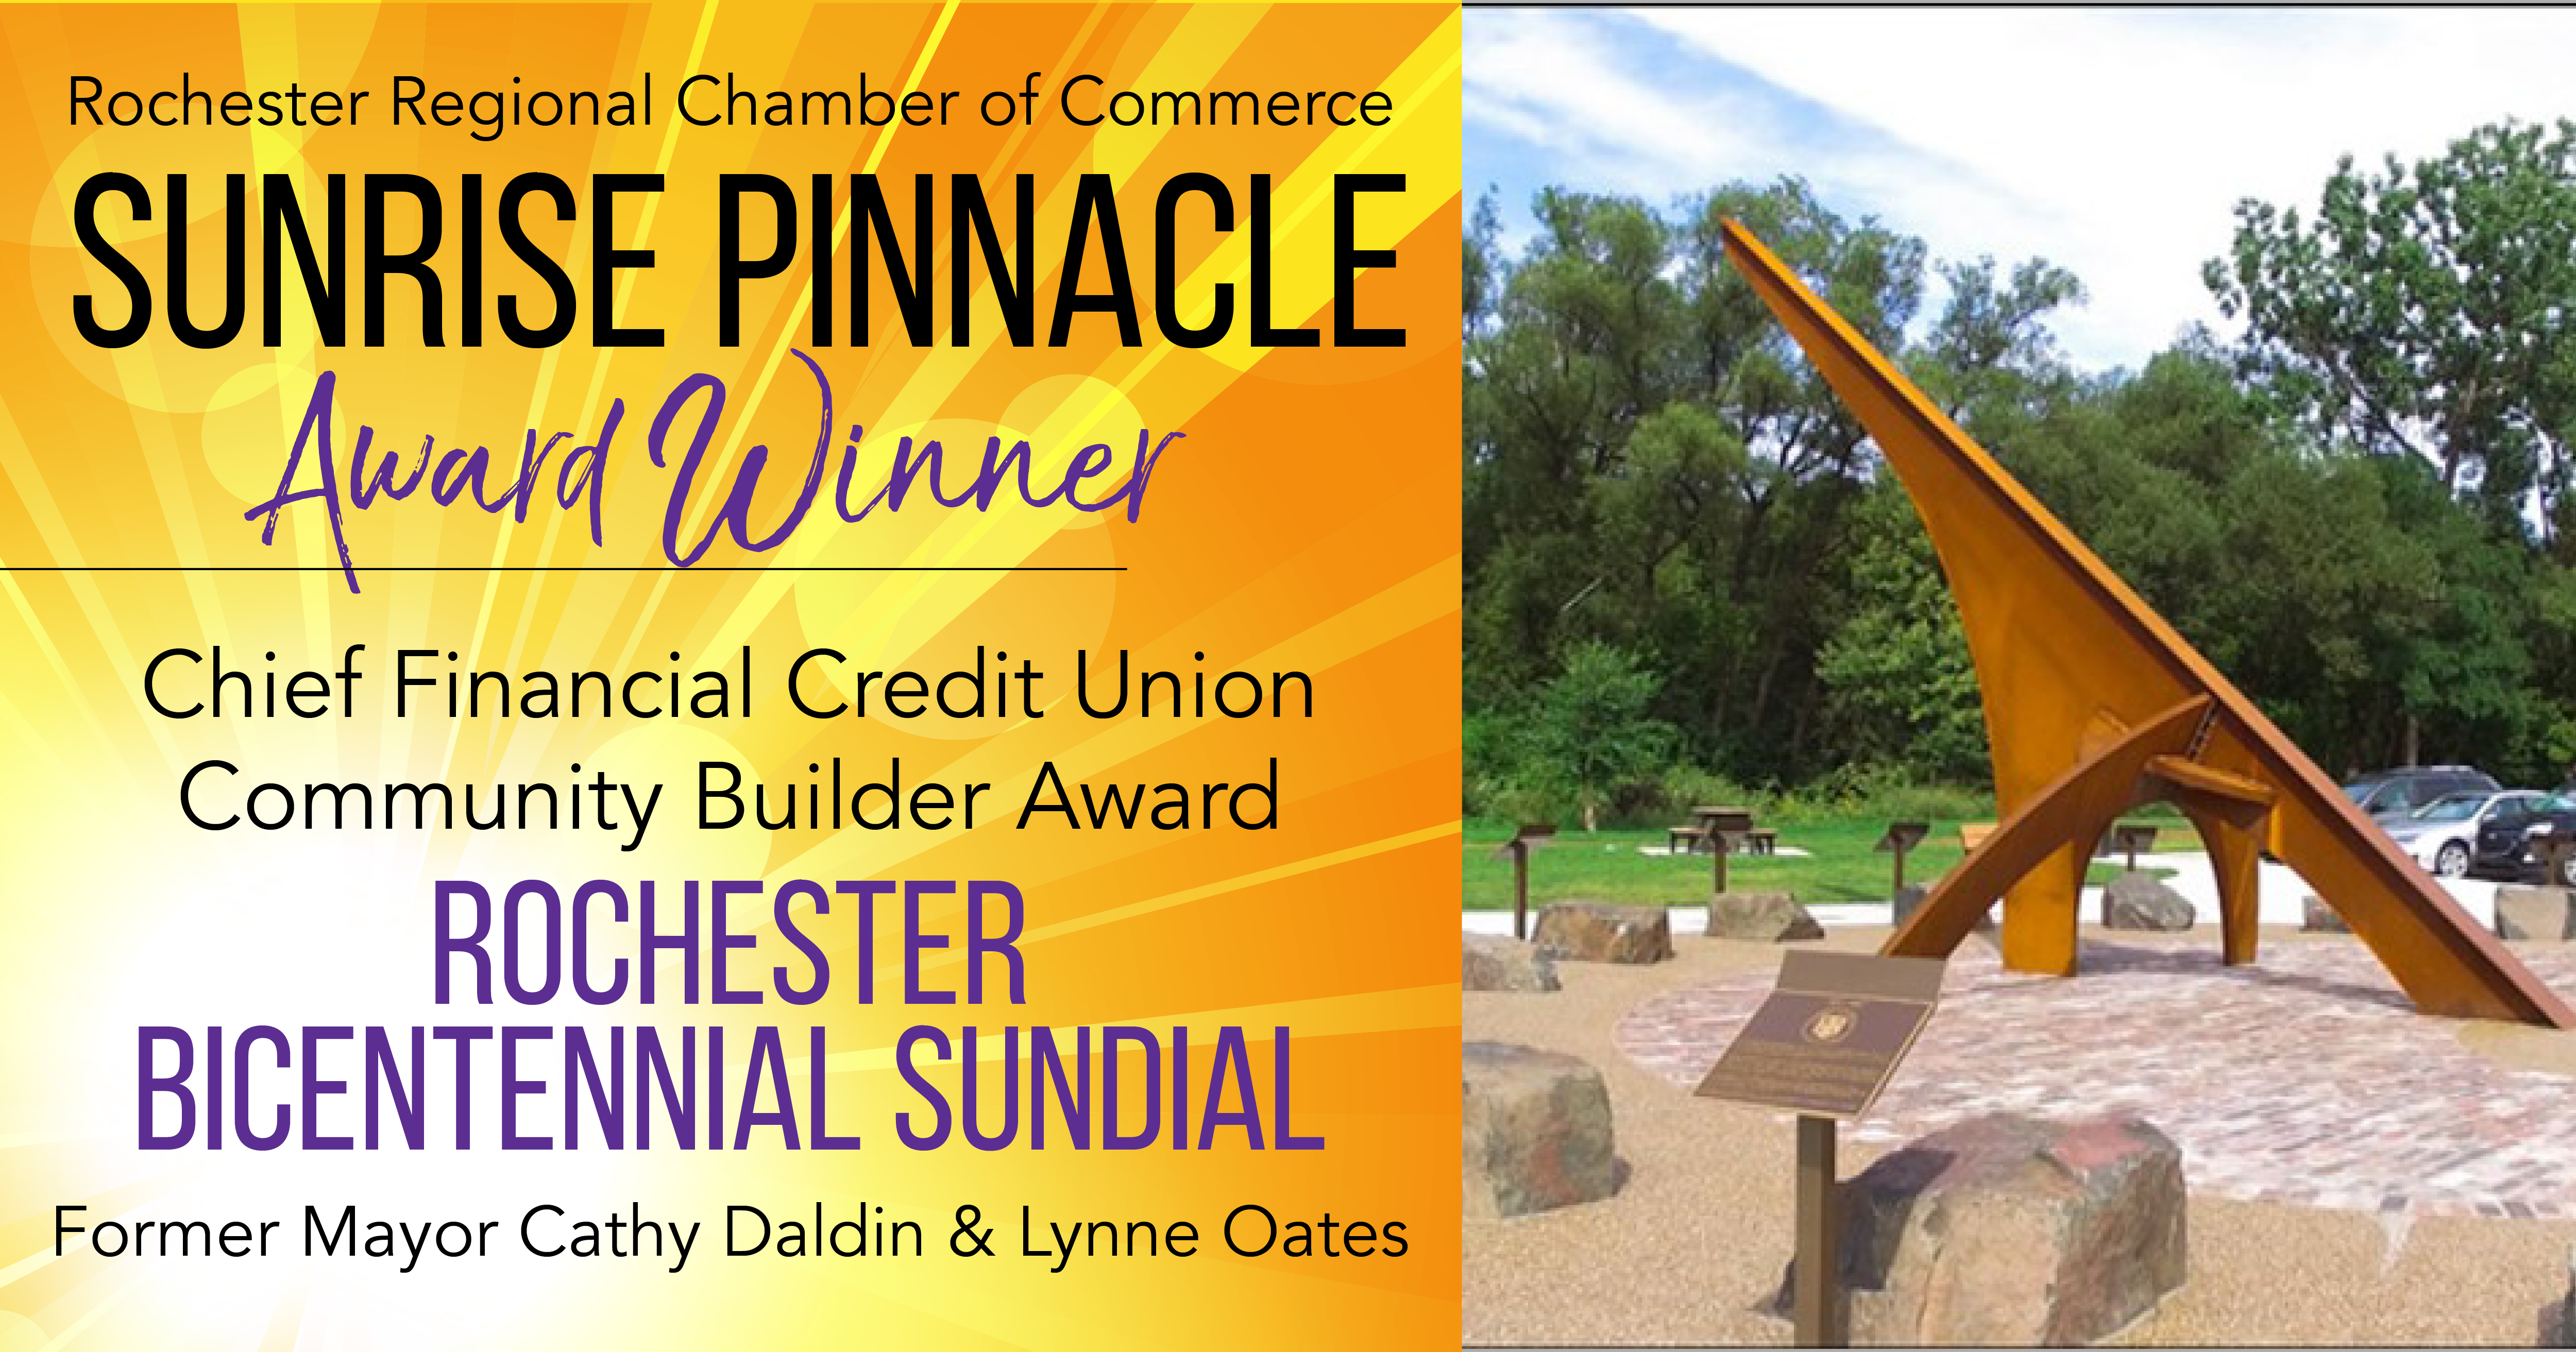 Image for Chief Financial Credit Union Community Builder Award to Rochester Bicentennial Sundial